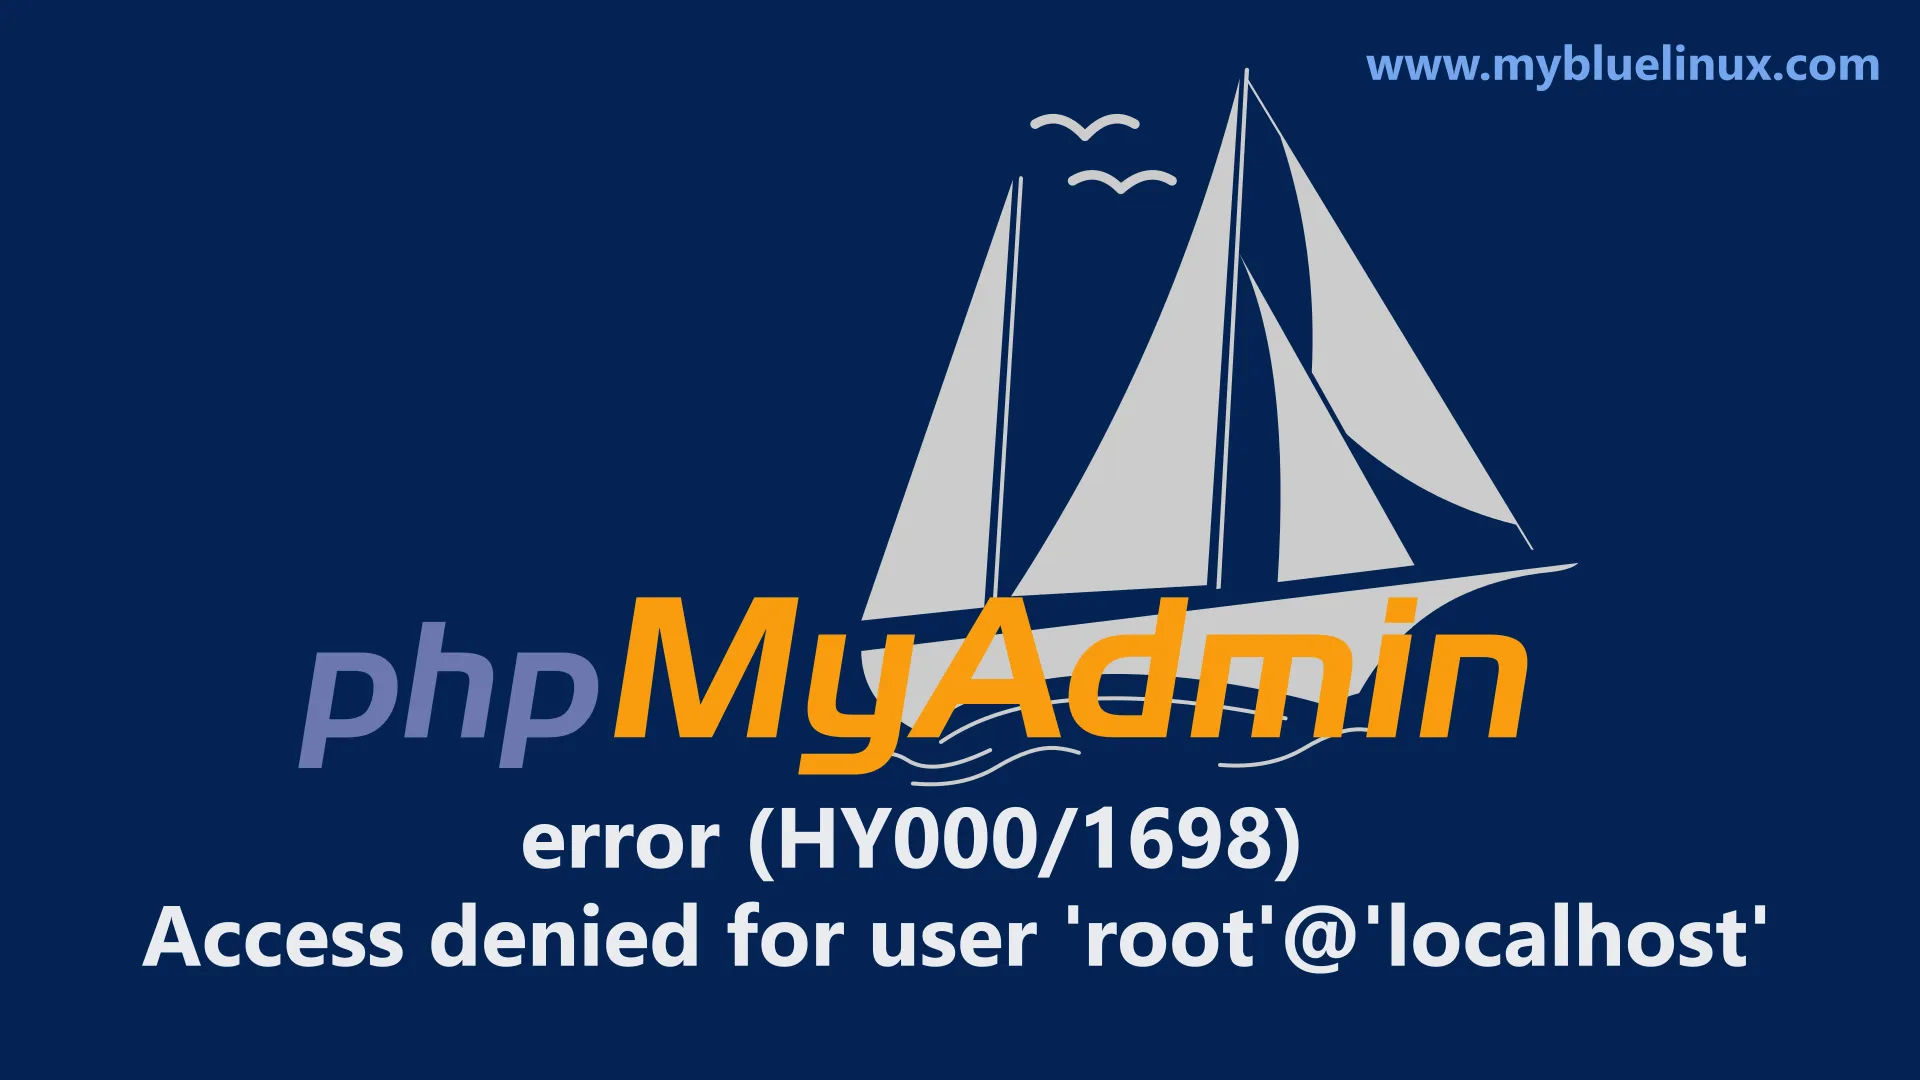 phpmyadmin - how recovery error (HY000/1698): Access denied for user 'root'@'localhost'